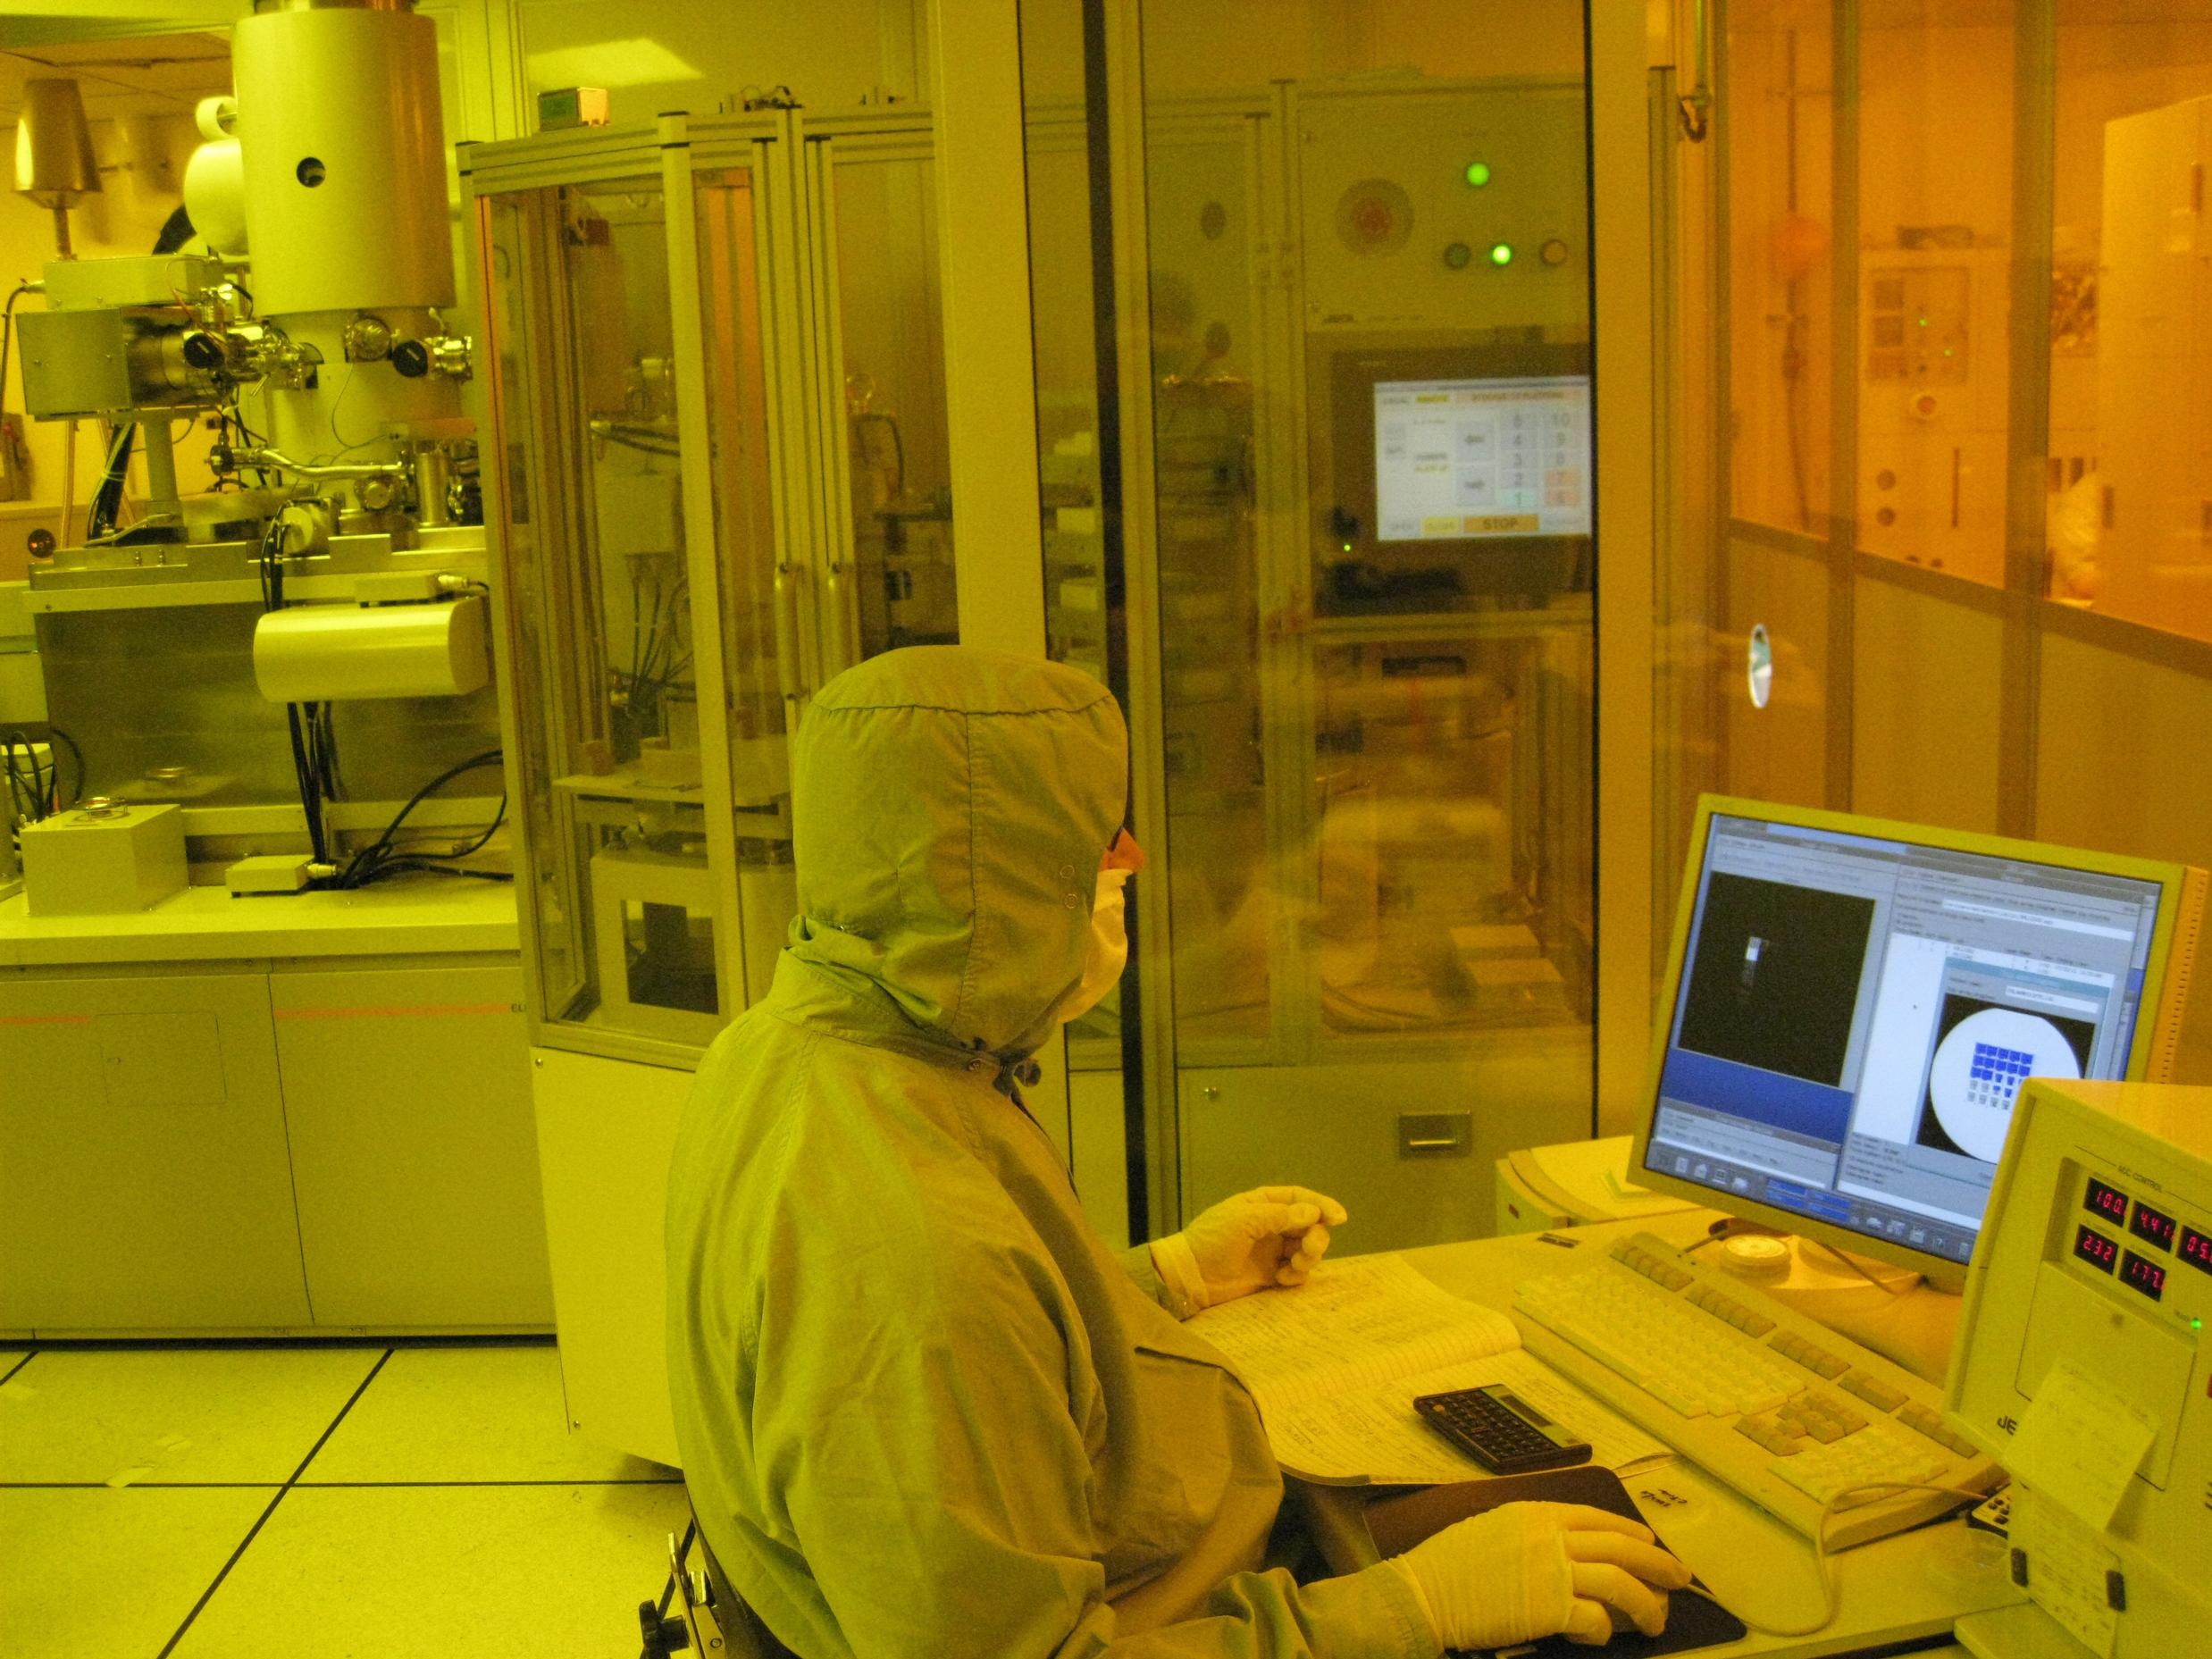 Richard Muller running the e-beam lithography tool that wrote over 1.3 million names on Orion's #JourneyToMars chip.